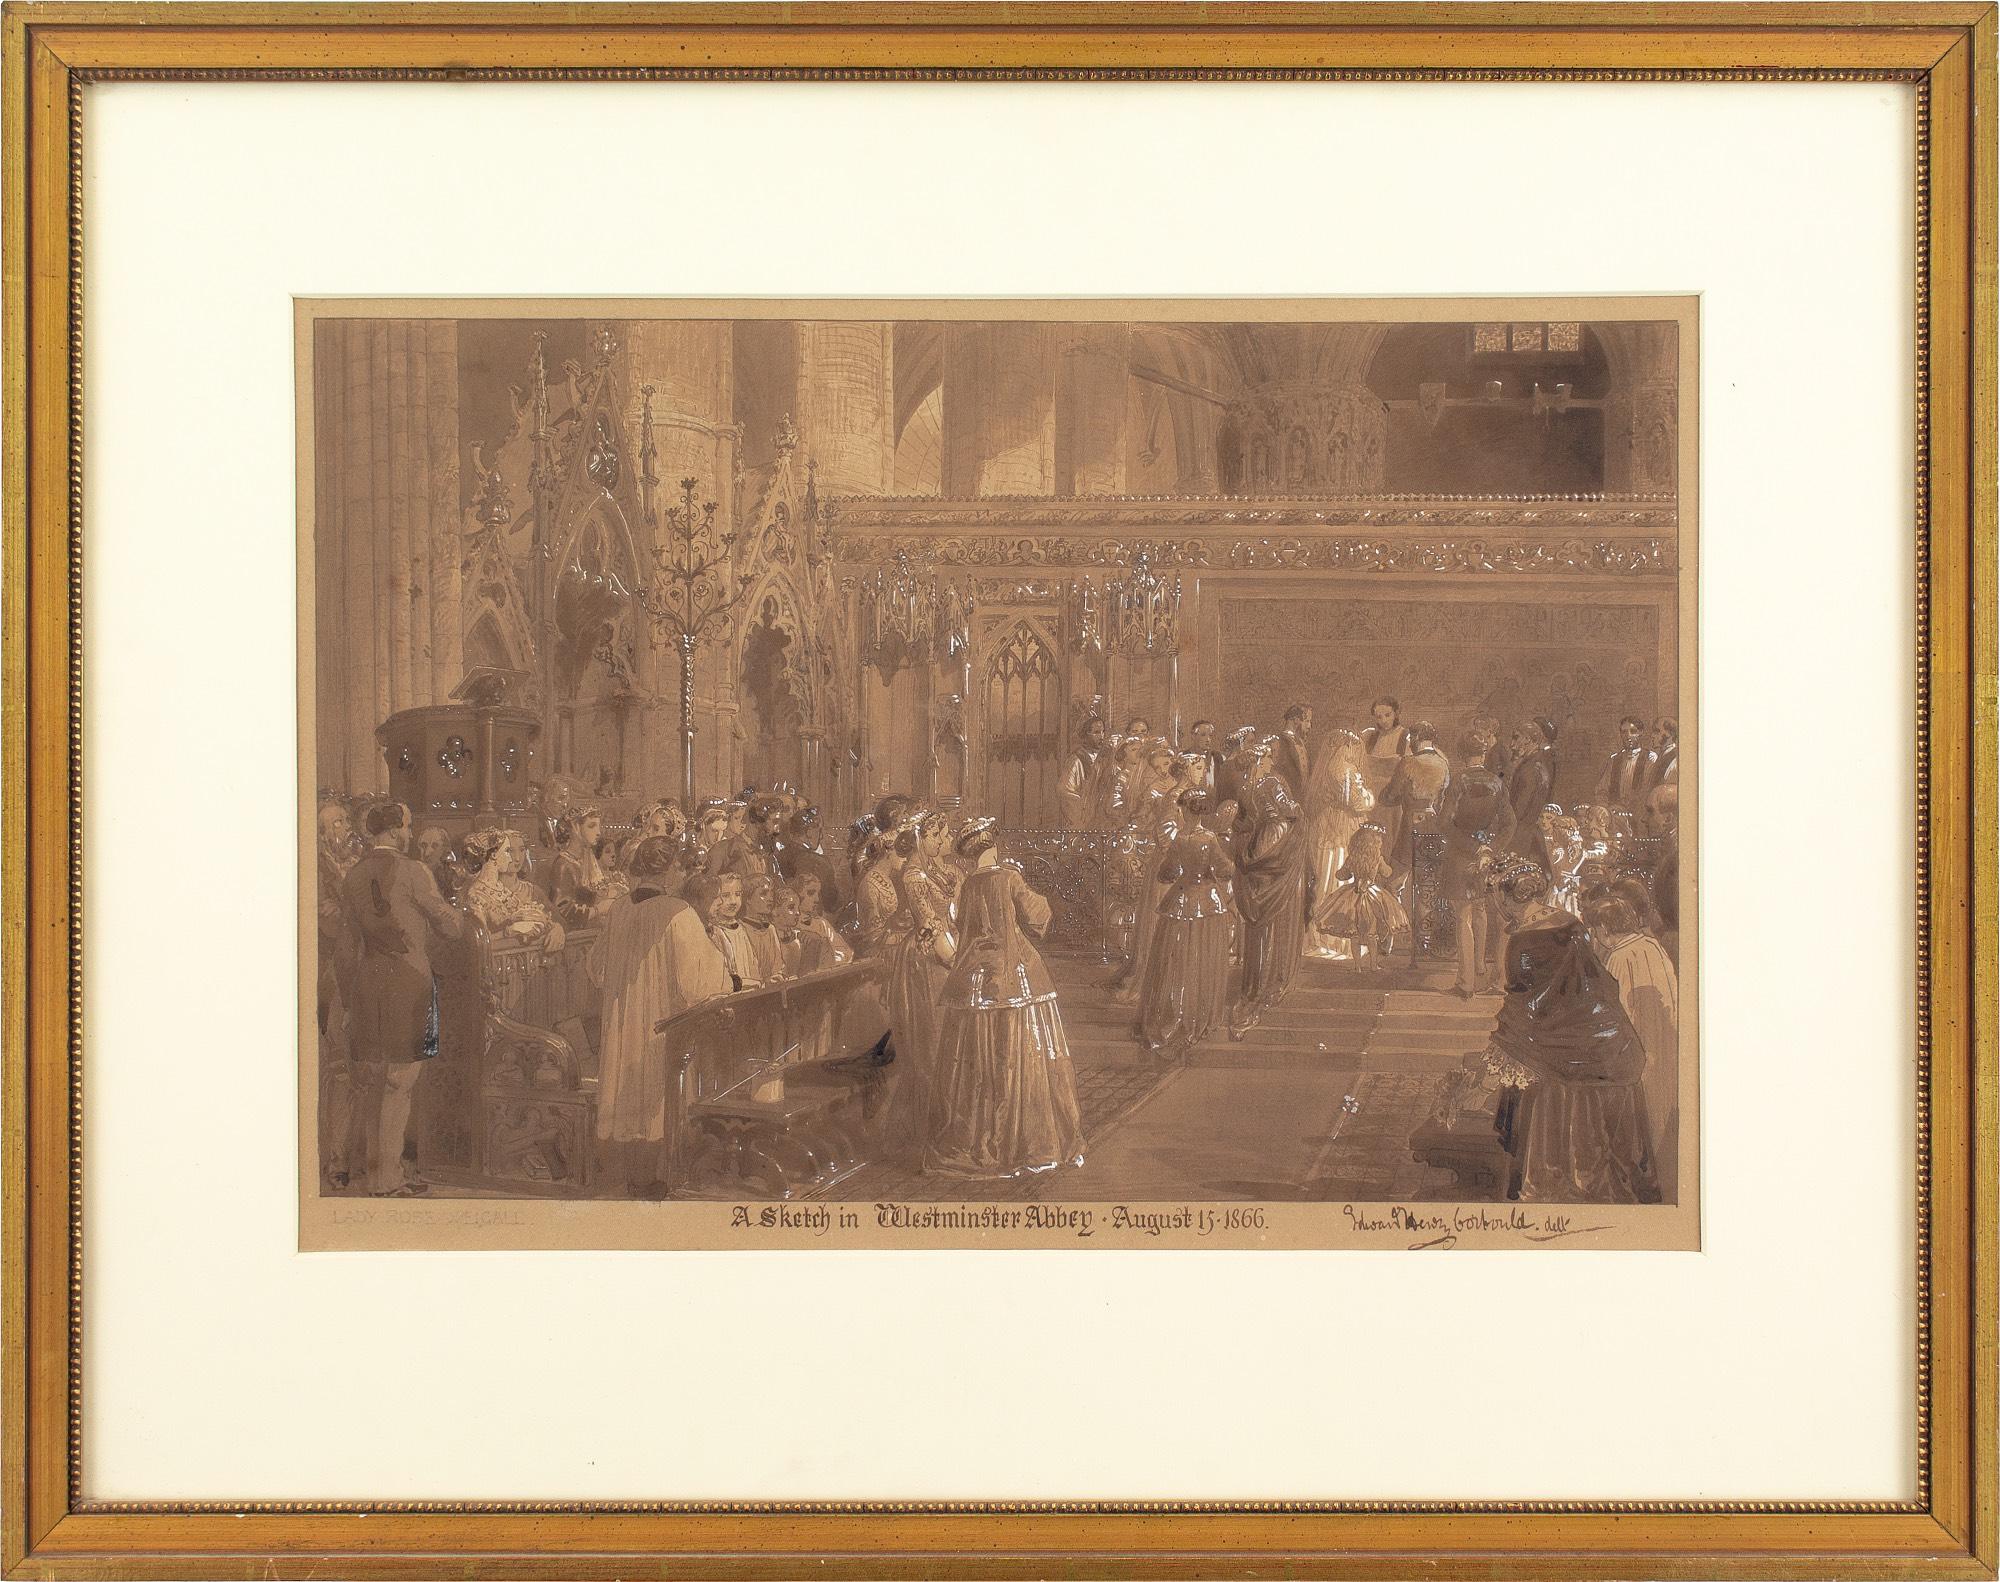 Edward Henry Corbould, Westminster Abbey, The Wedding